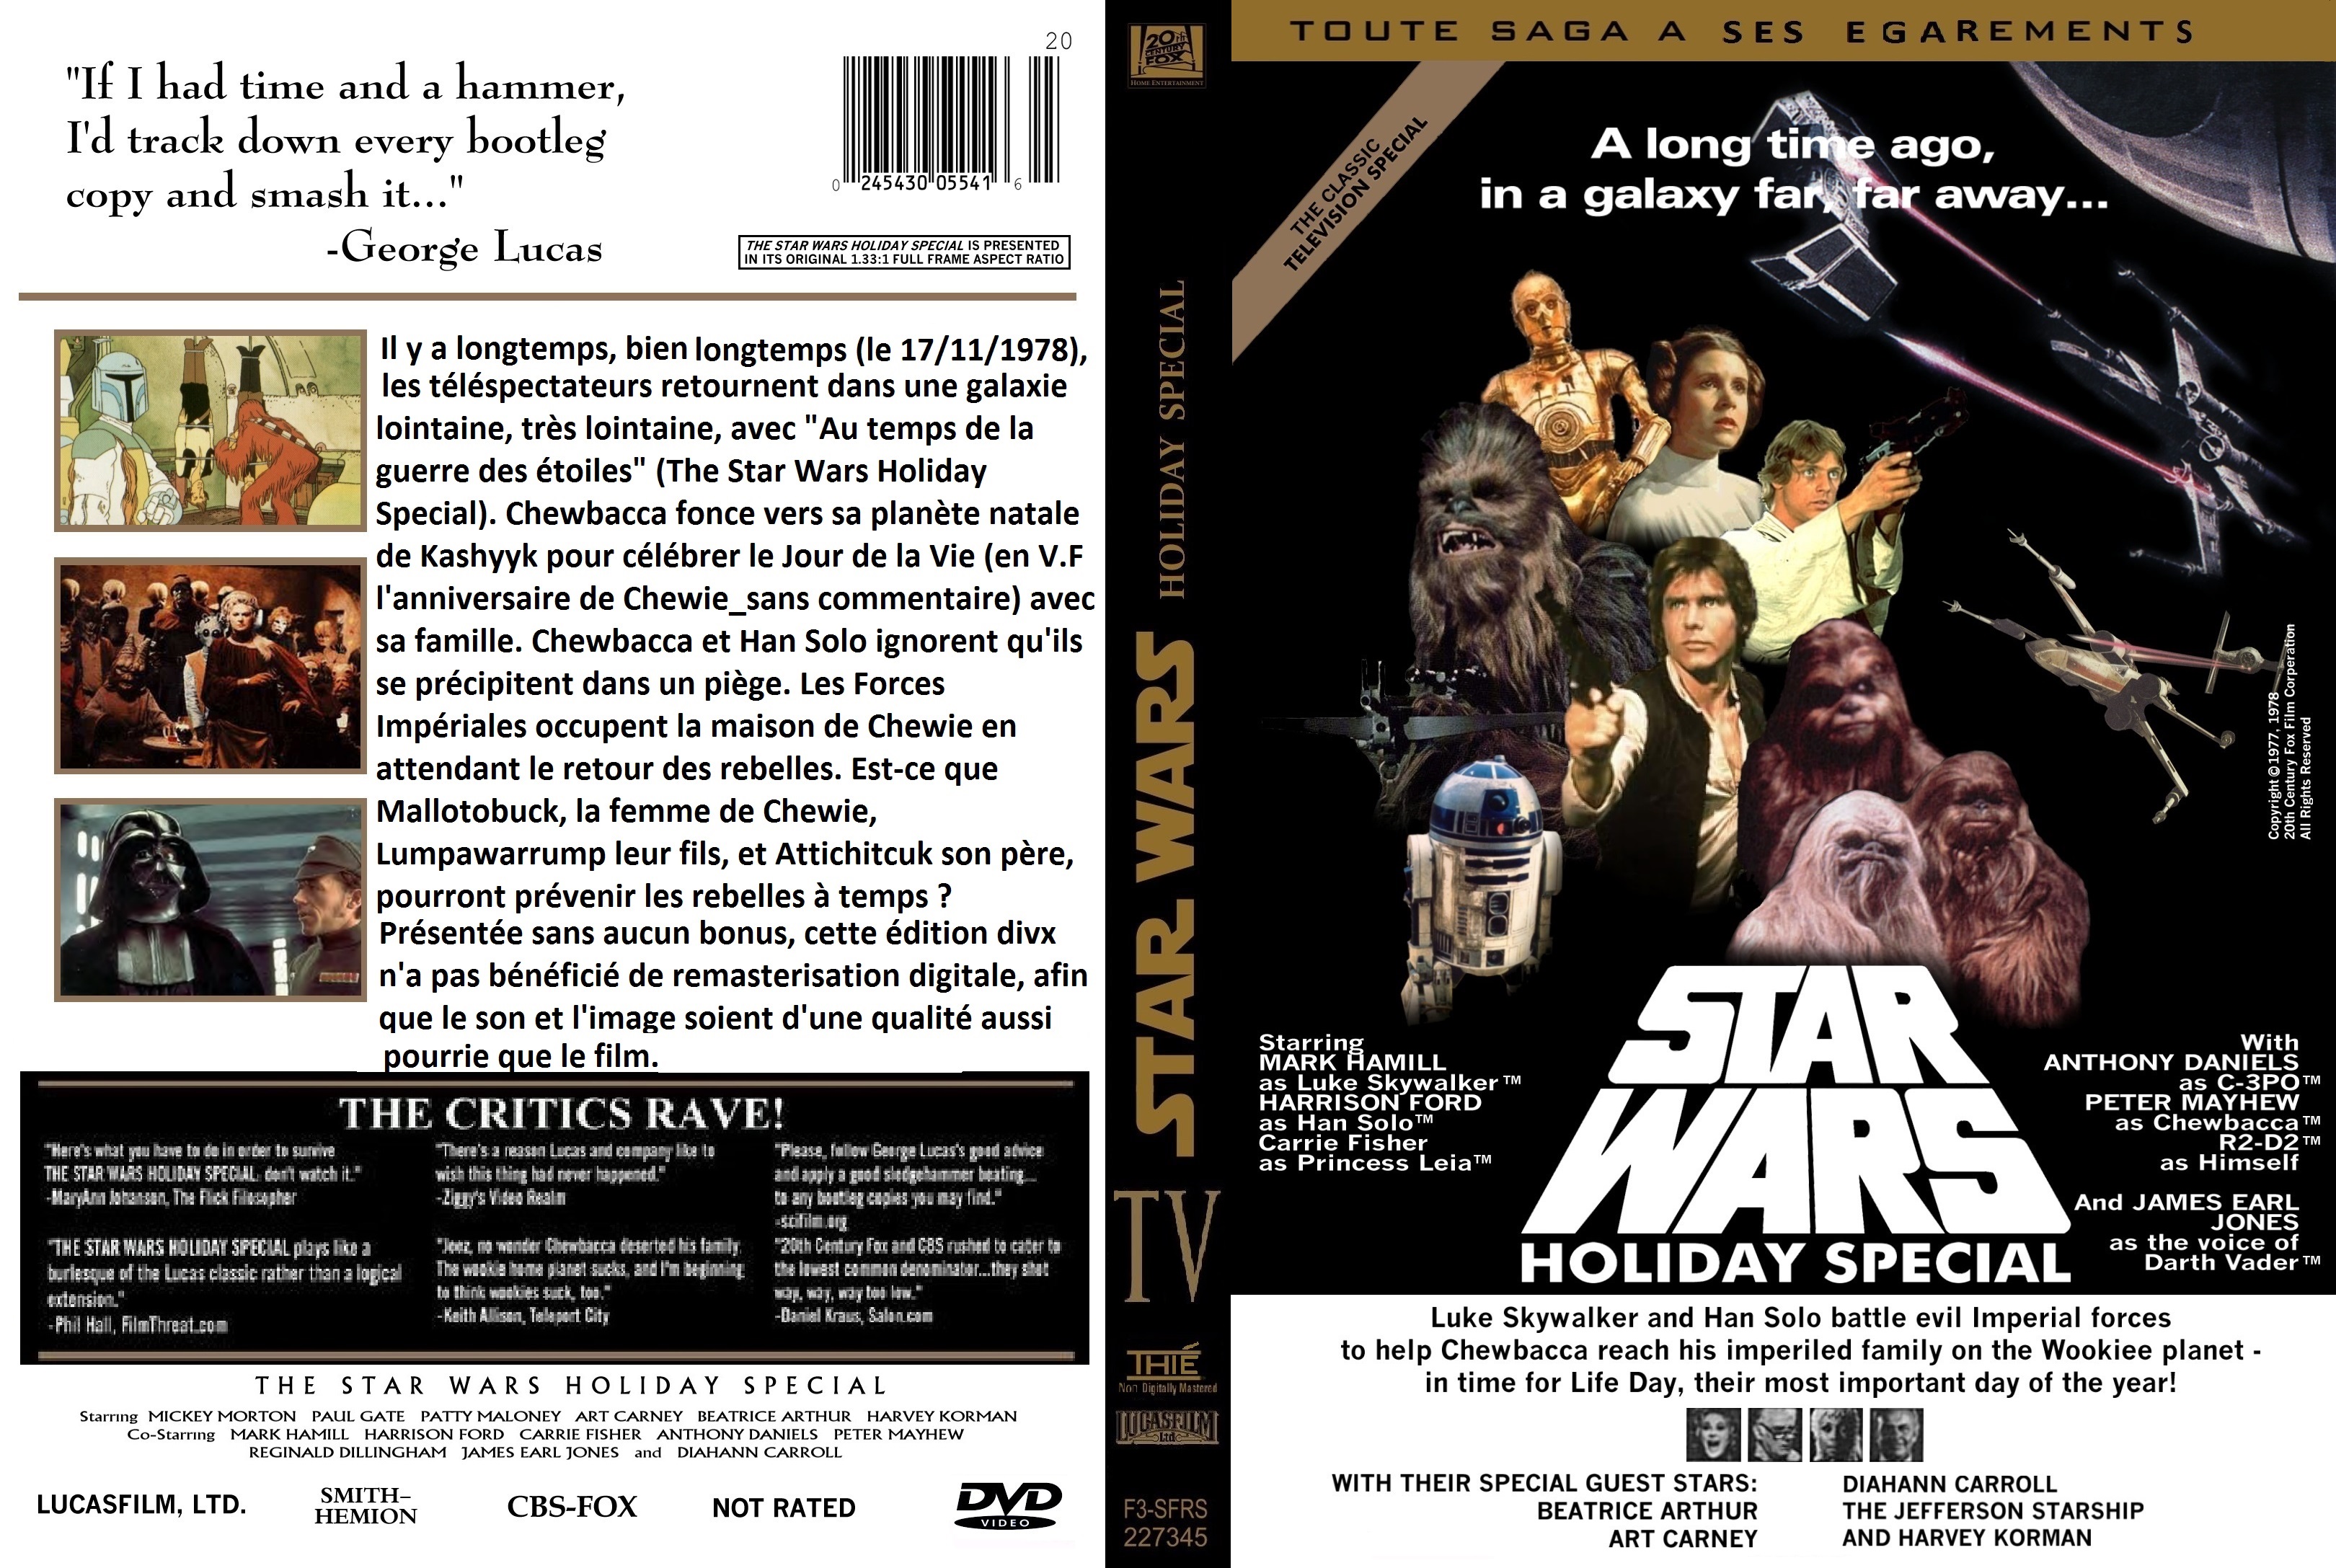 Jaquette DVD Star Wars Holiday Special custom